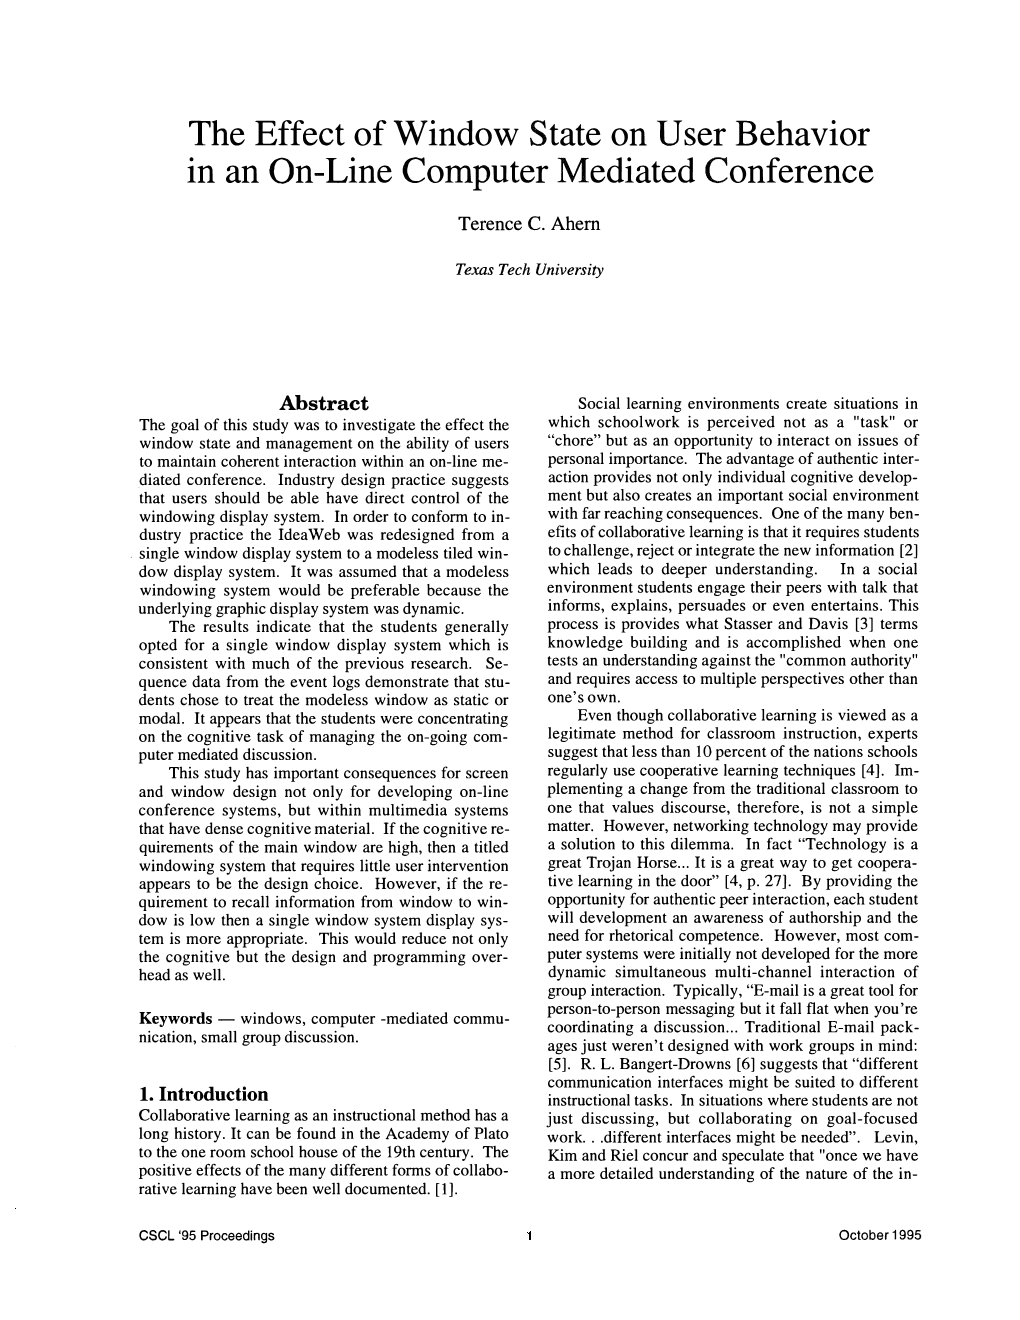 The Effect of Window State on User Behavior in an On-Line Computer Mediated Conference